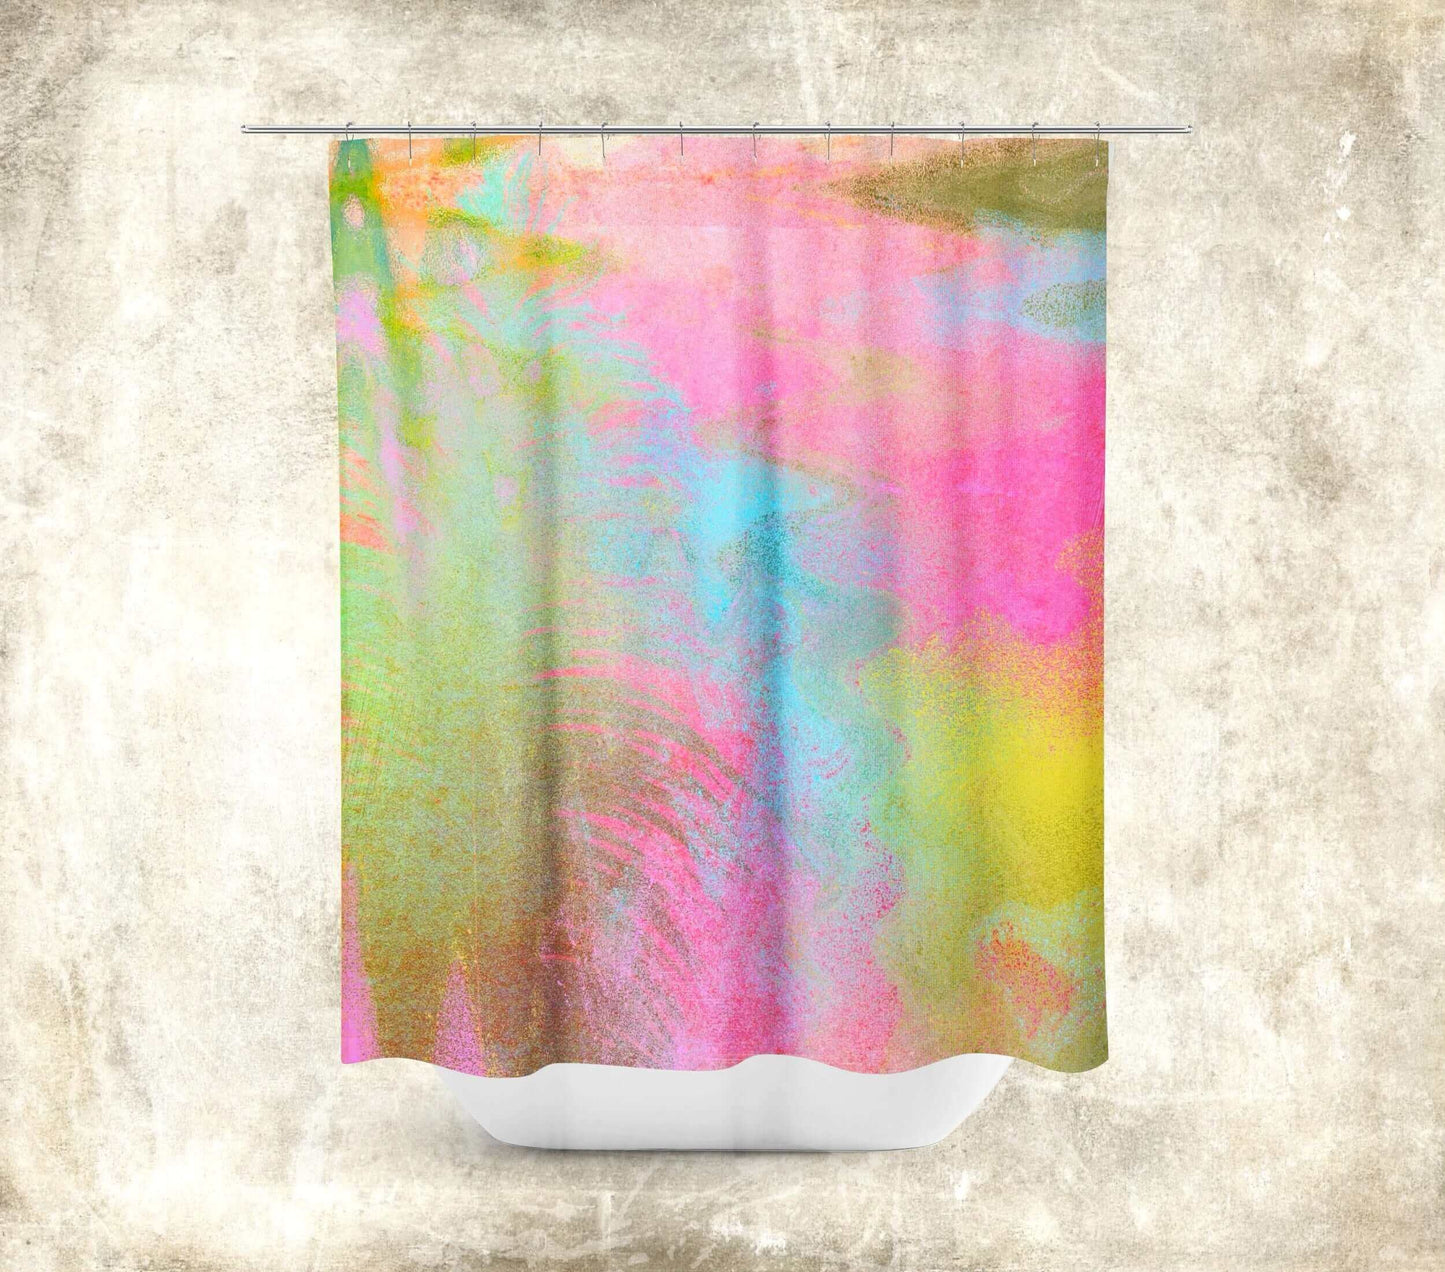 Pastel Tropical Storms “Miami Storms” Abstract Art Colorful Shower Curtain